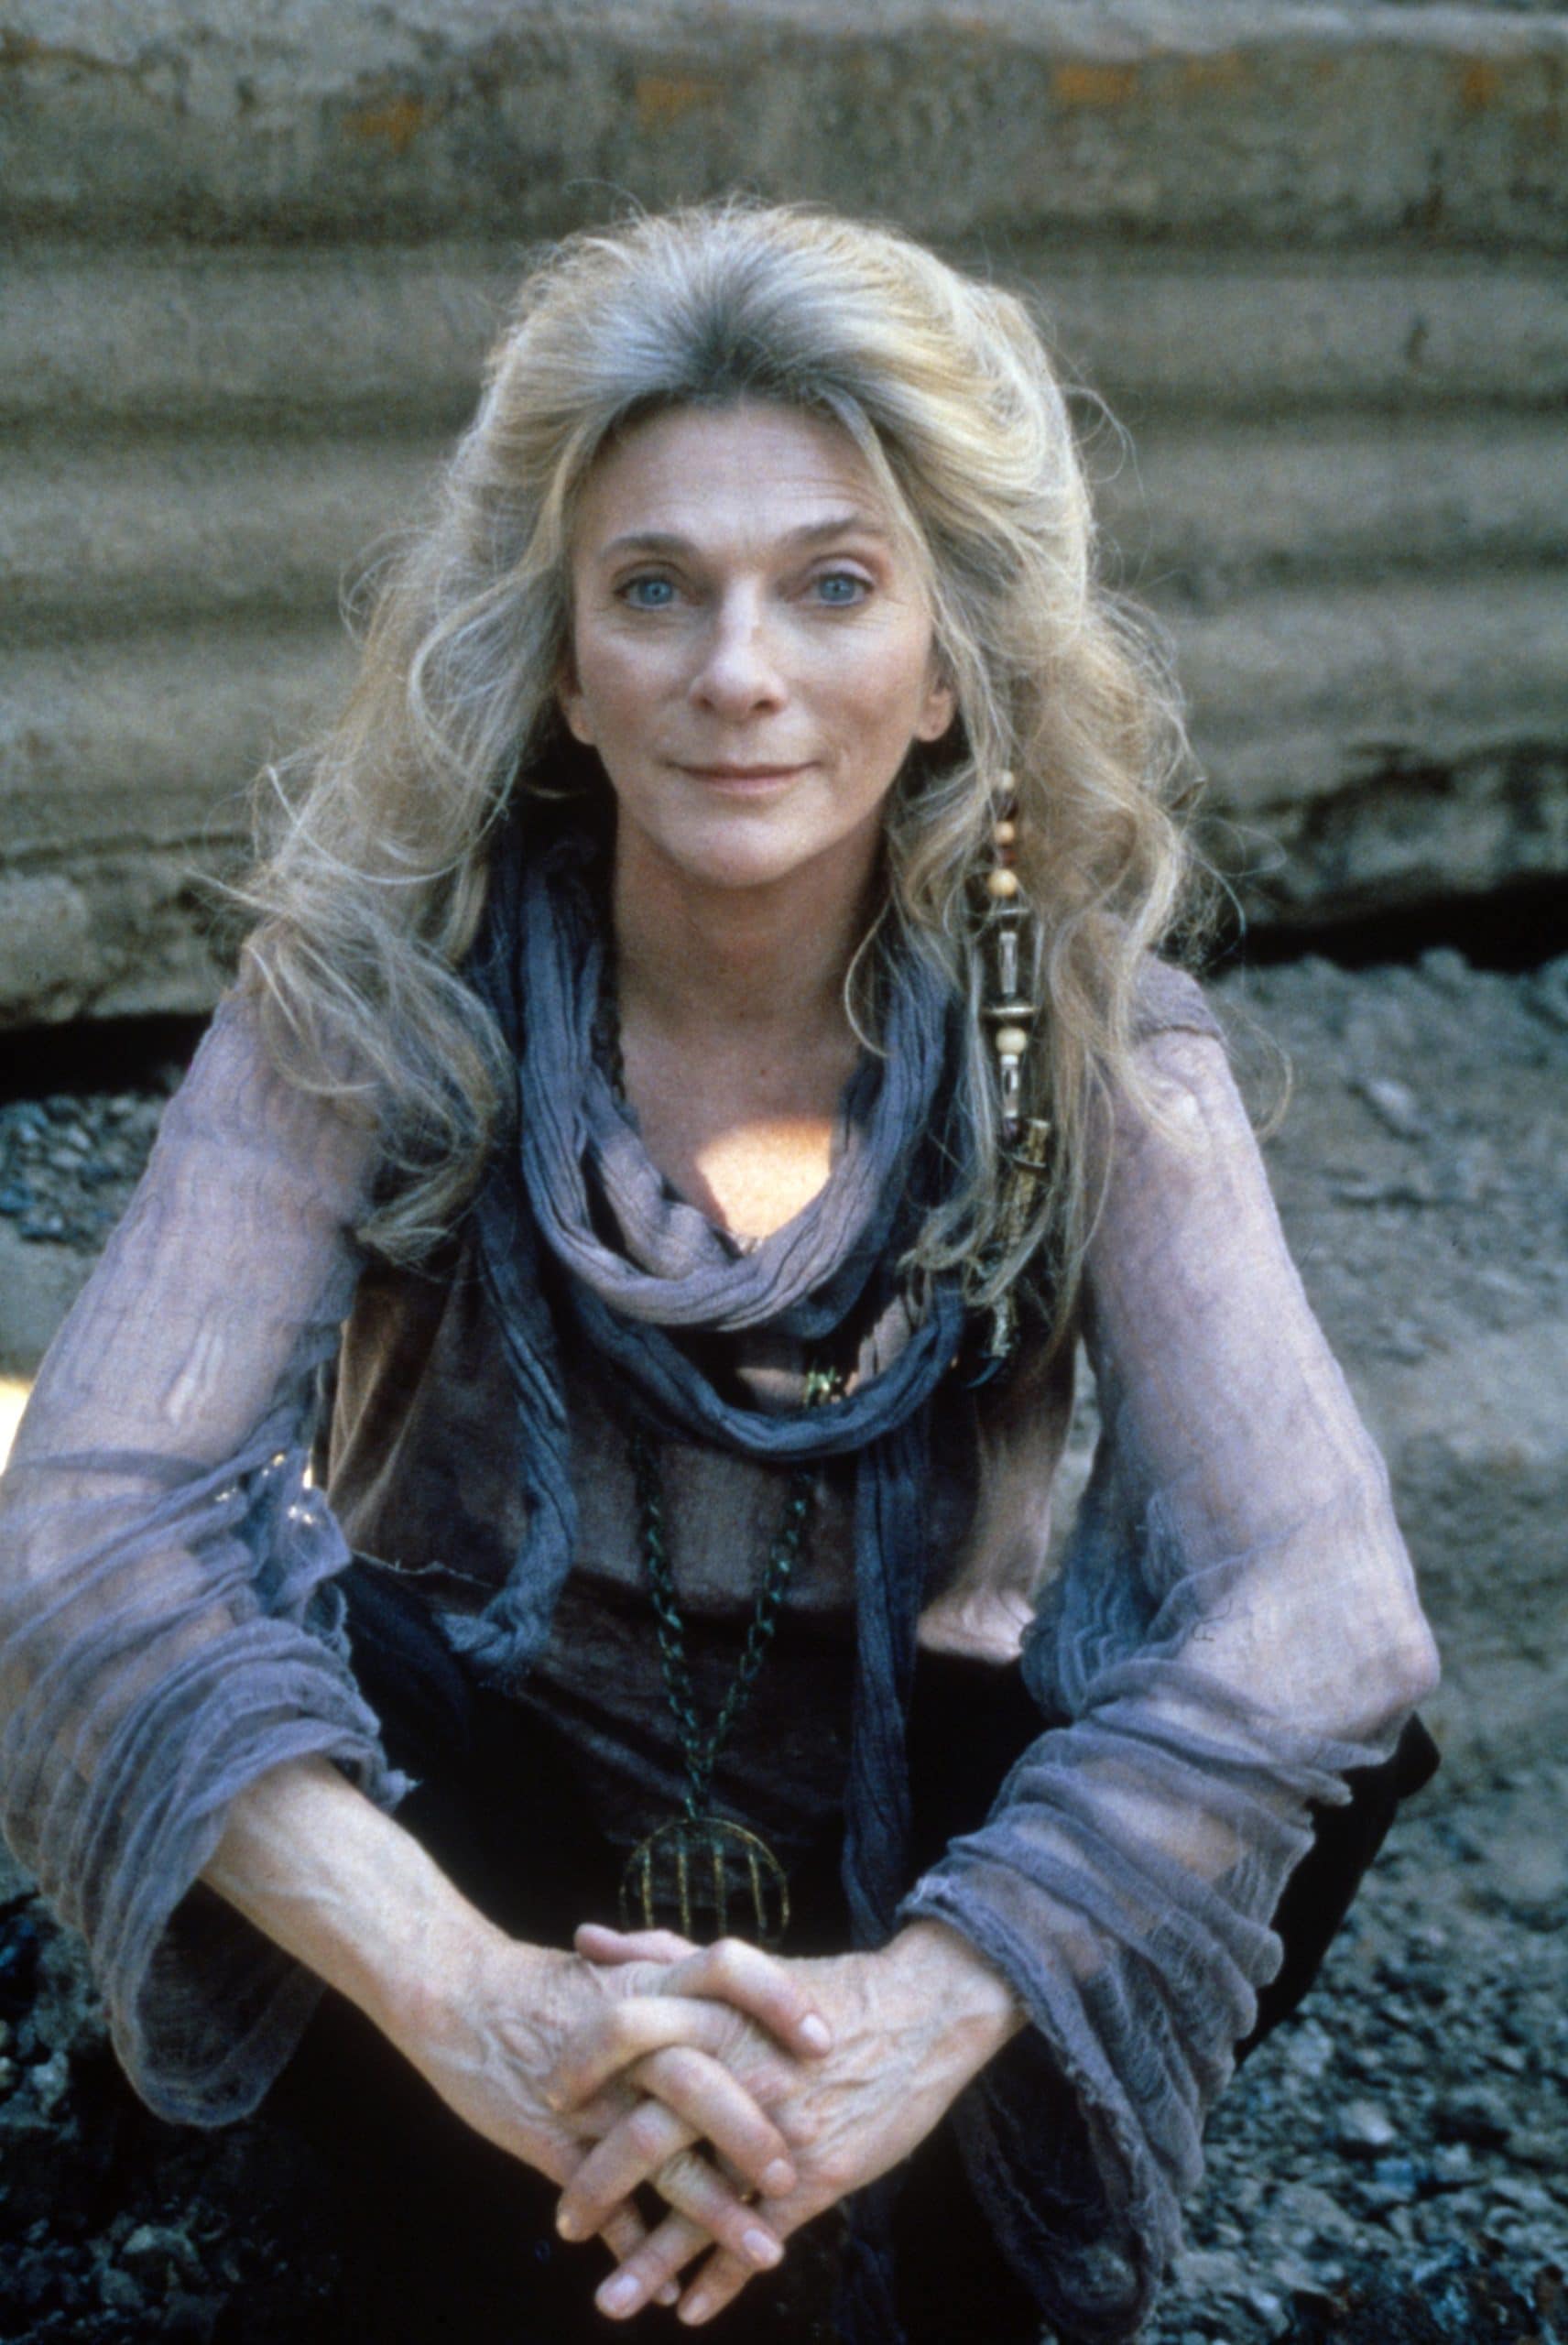 A TOWN HAS TURNED TO DUST, Judy Collins, 1998